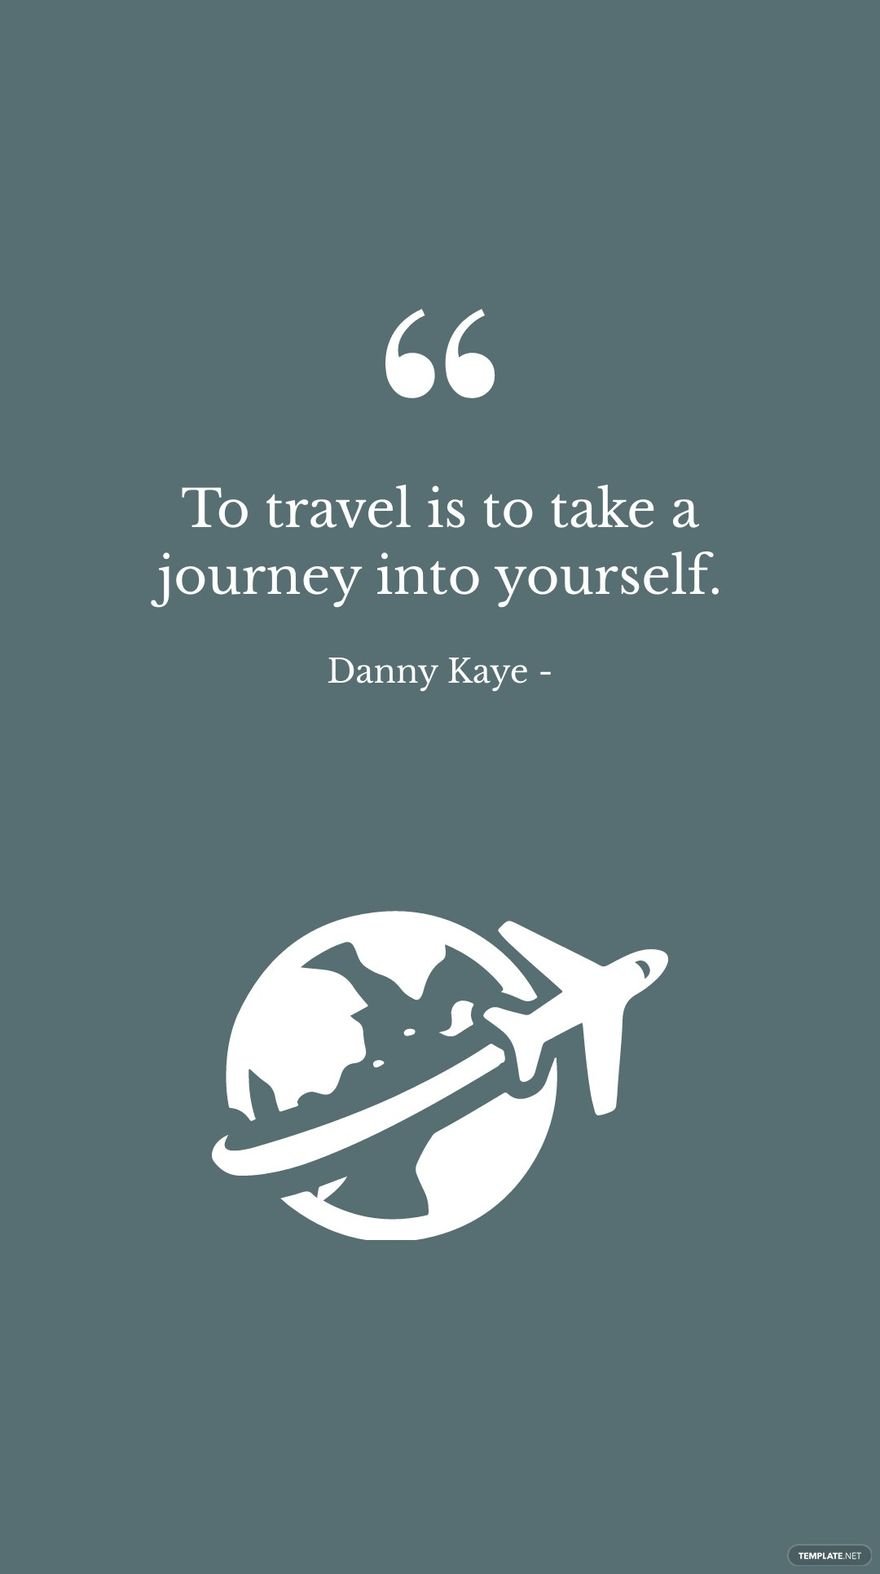 Free Danny Kaye - To travel is to take a journey into yourself. in JPG